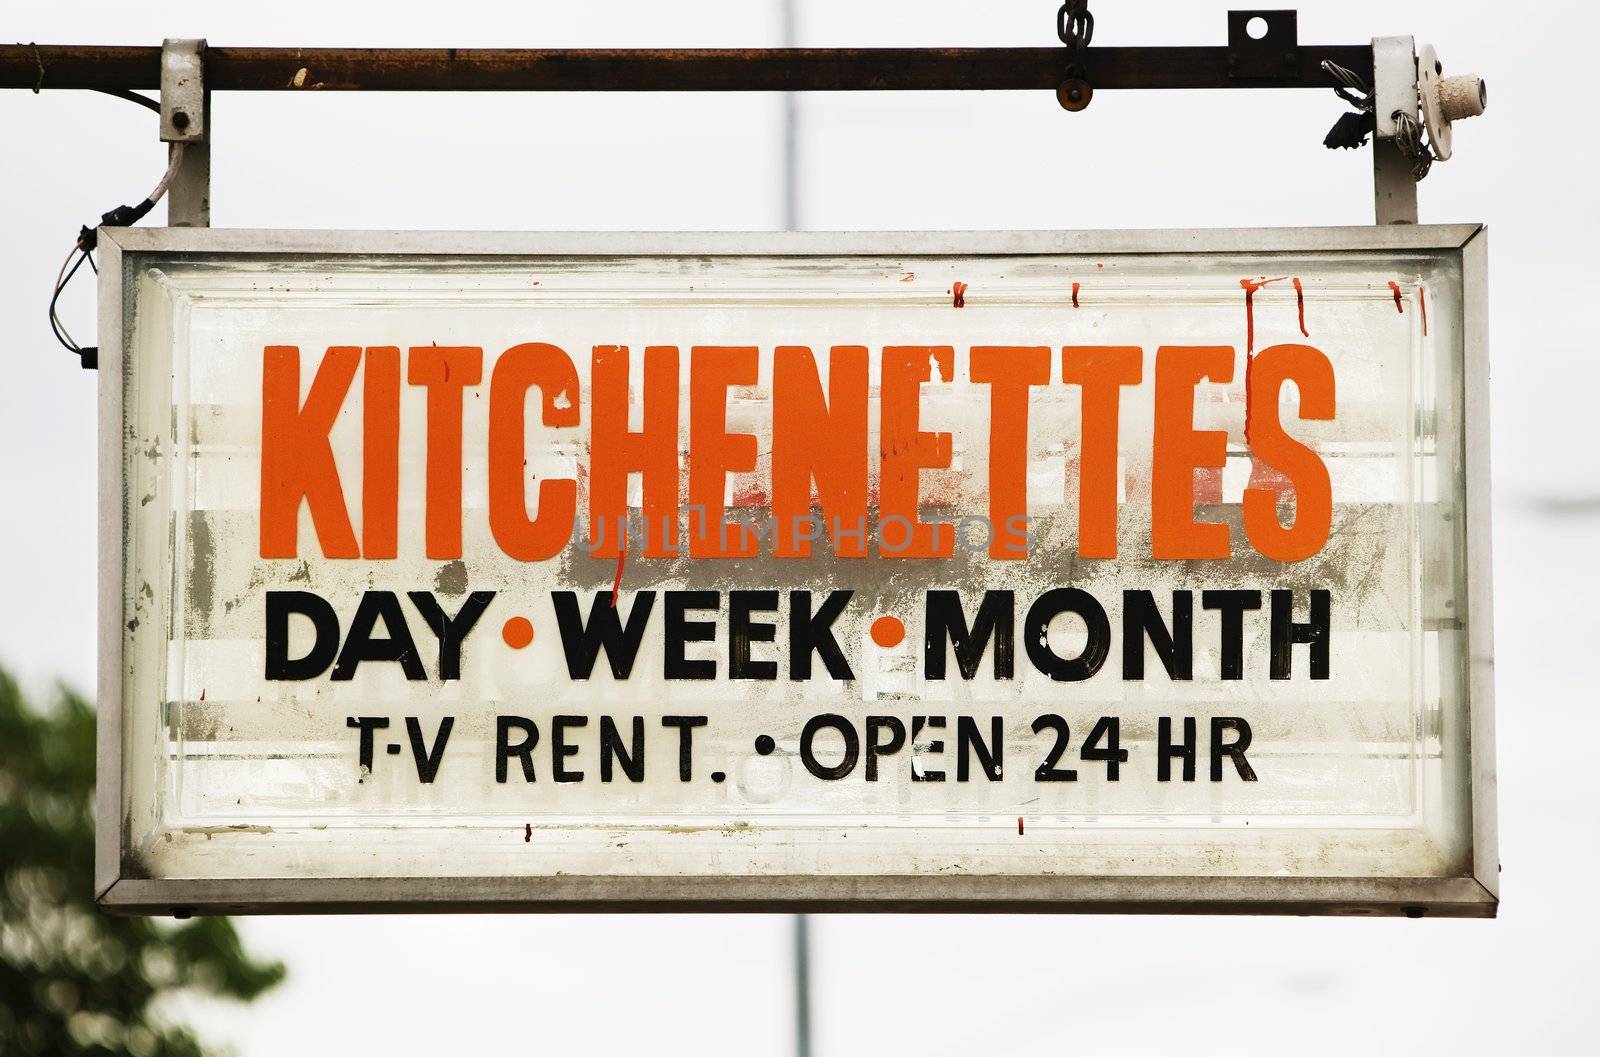 Motel sign advertising rooms with kitchenettes.